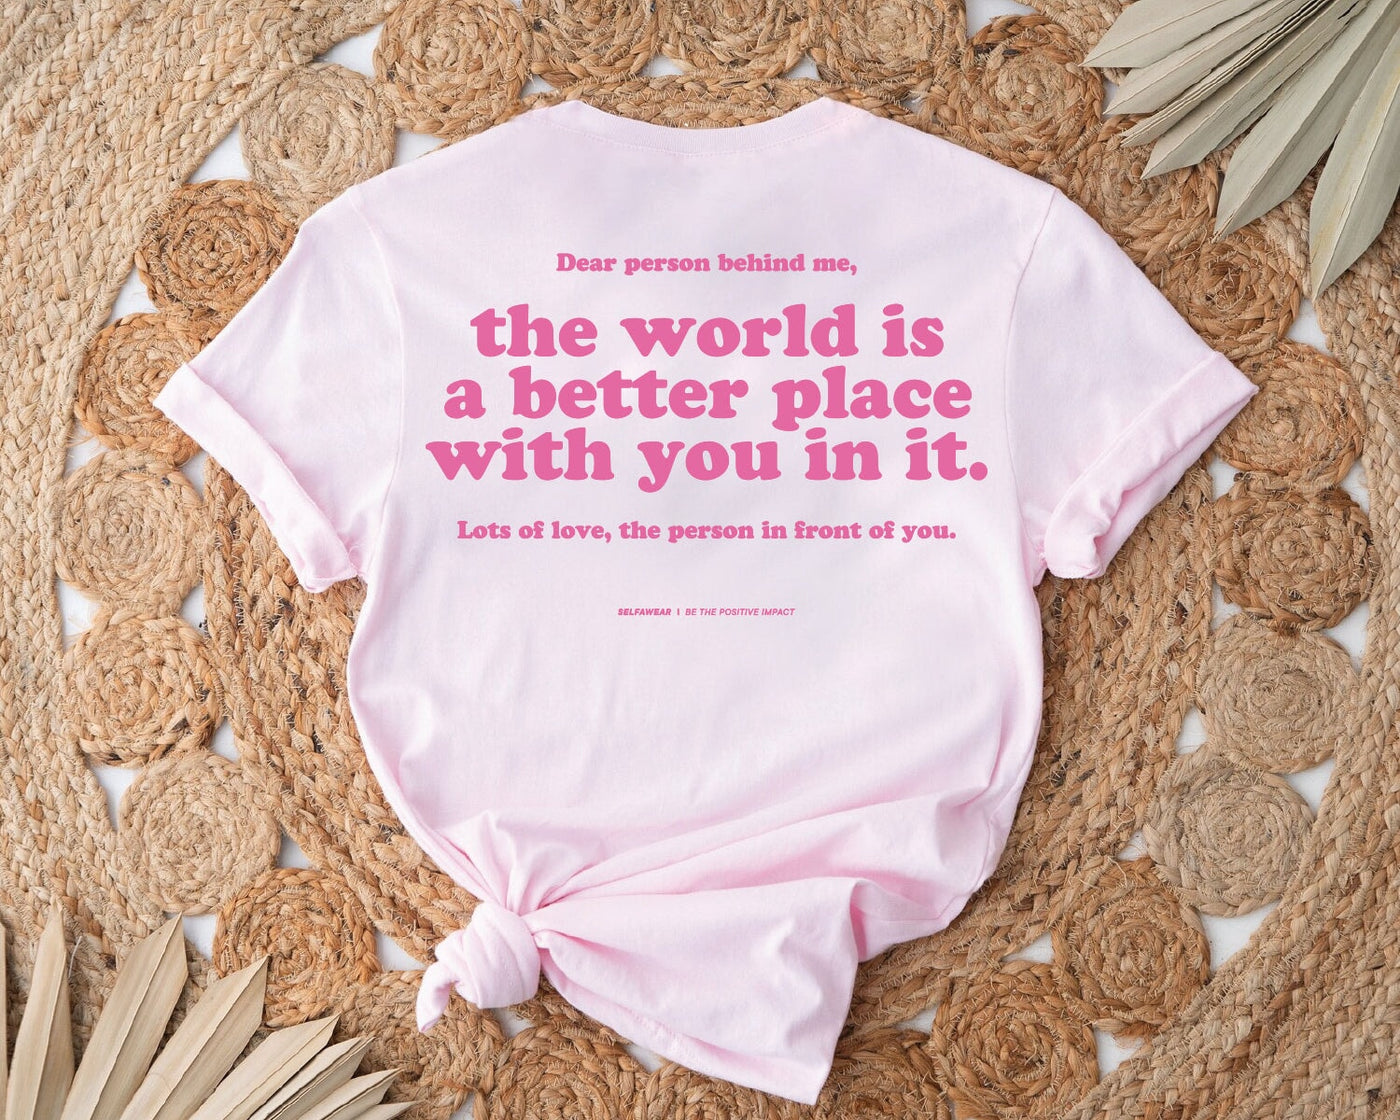 Better Place With You T-Shirt Pink Shirts Selfawear 